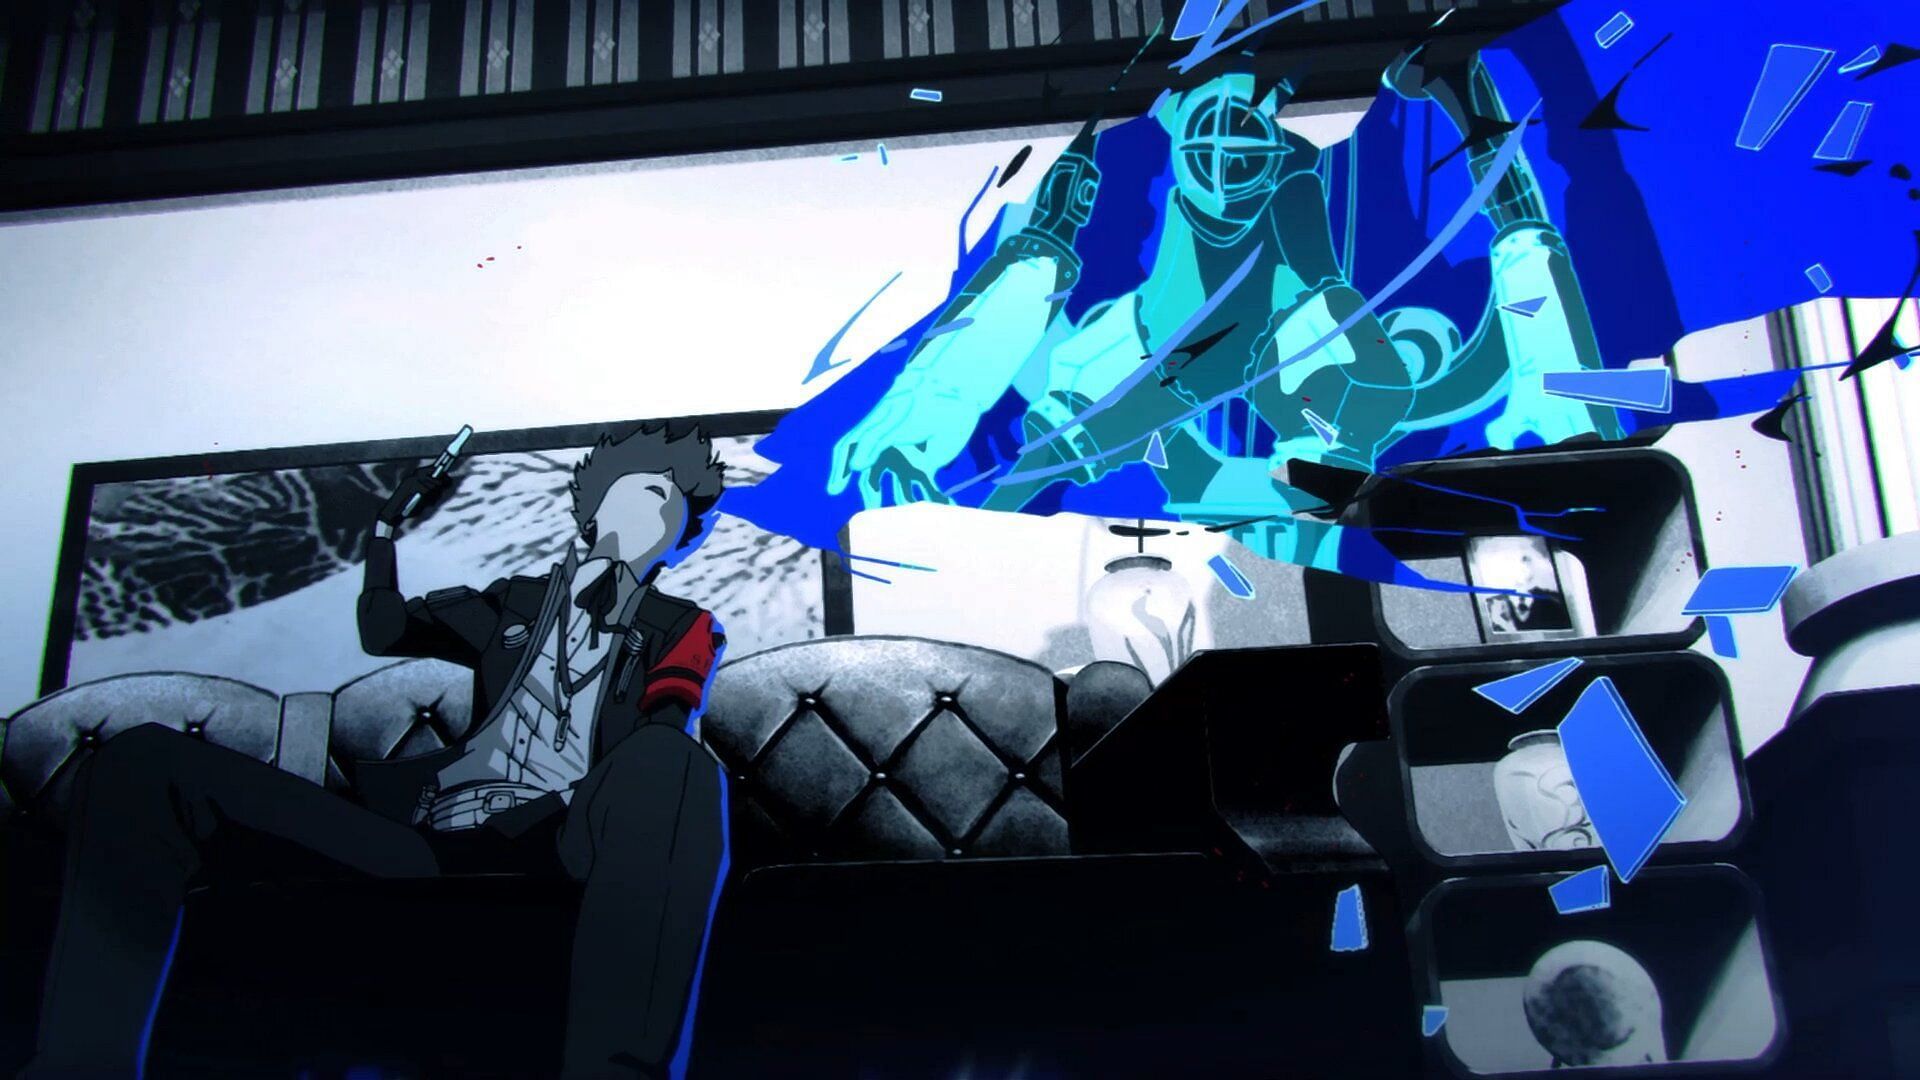 Any new version of Persona 3 means more soundtracks by Lotus Juice (Image via Atlus)